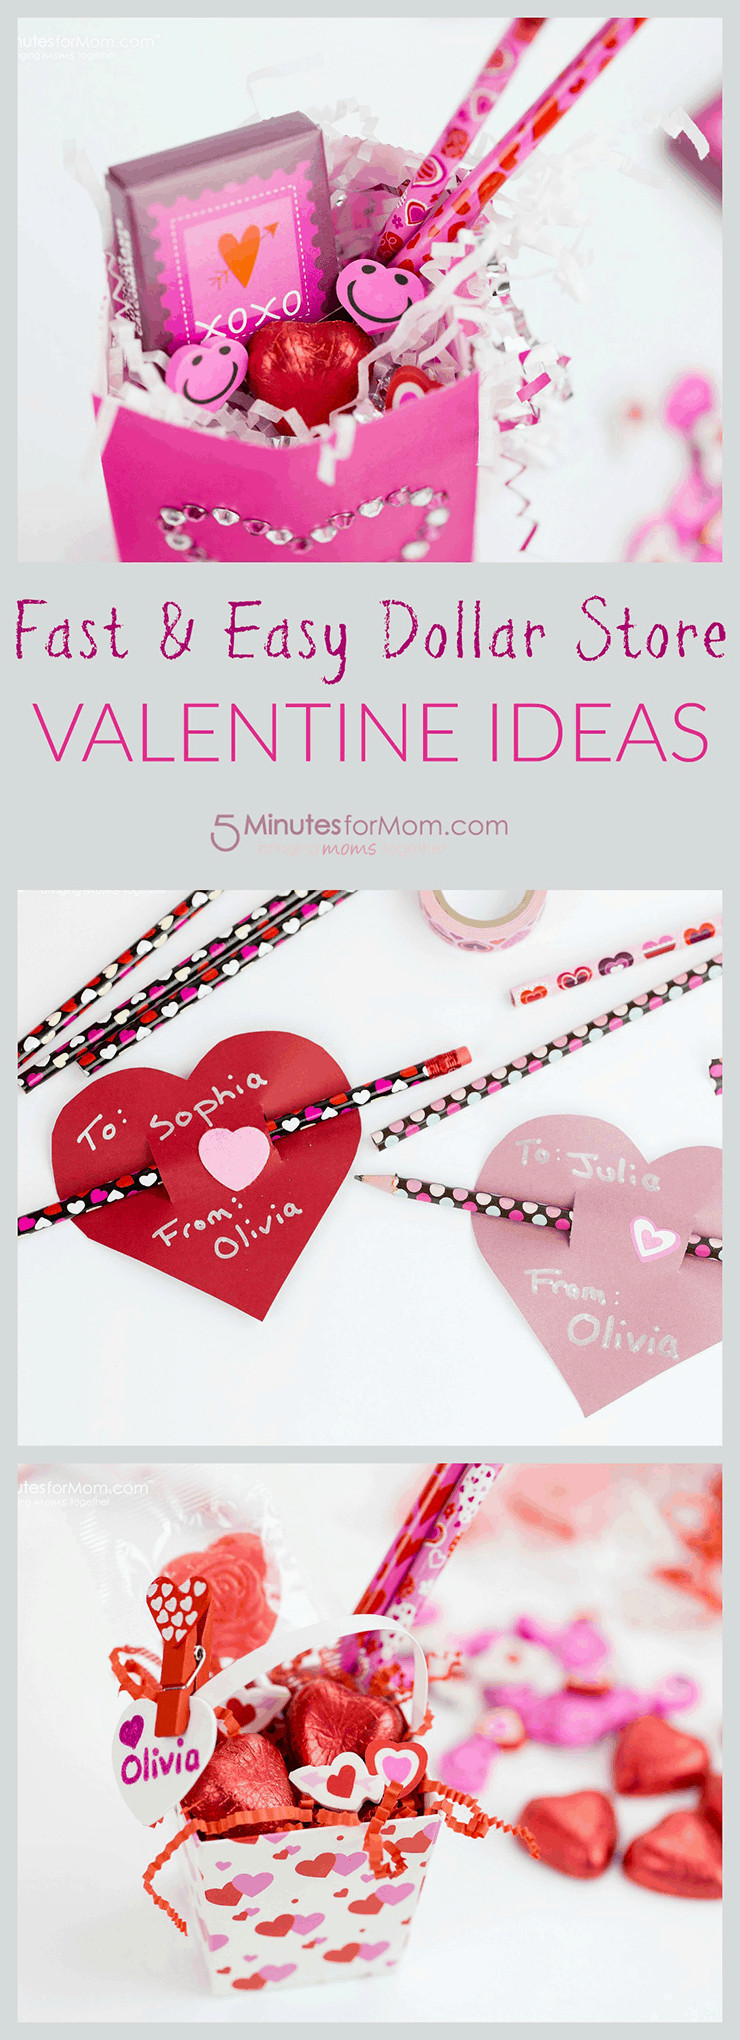 Valentines Gift Ideas For Mom
 Fast and Easy Dollar Store Valentine Ideas 5 Minutes for Mom